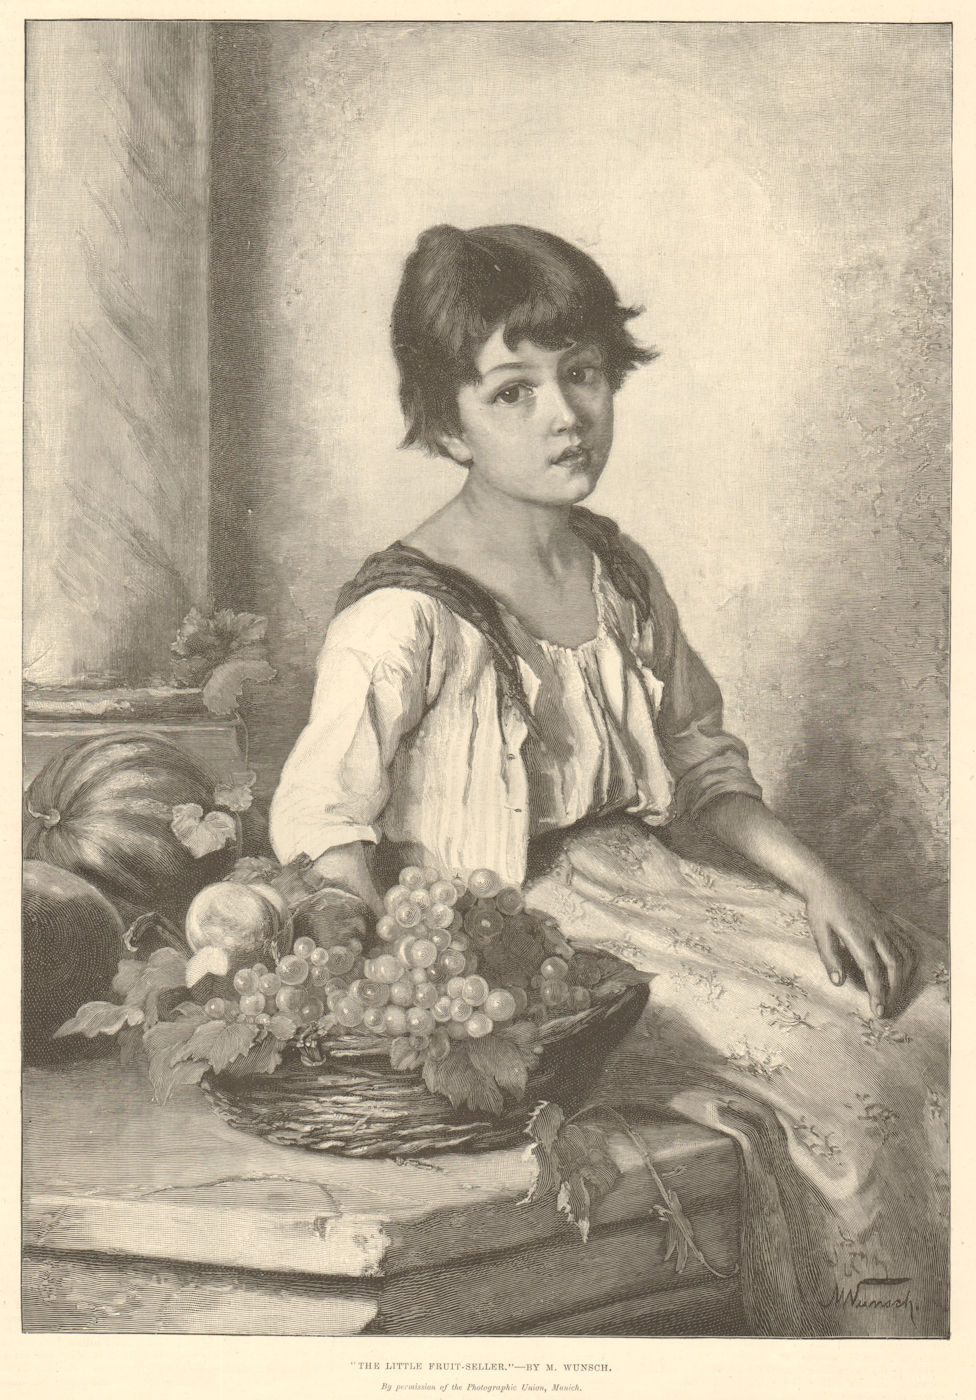 Associate Product "The little fruit-seller"-by M. Wunsch. Food. Markets 1891 ILN full page print